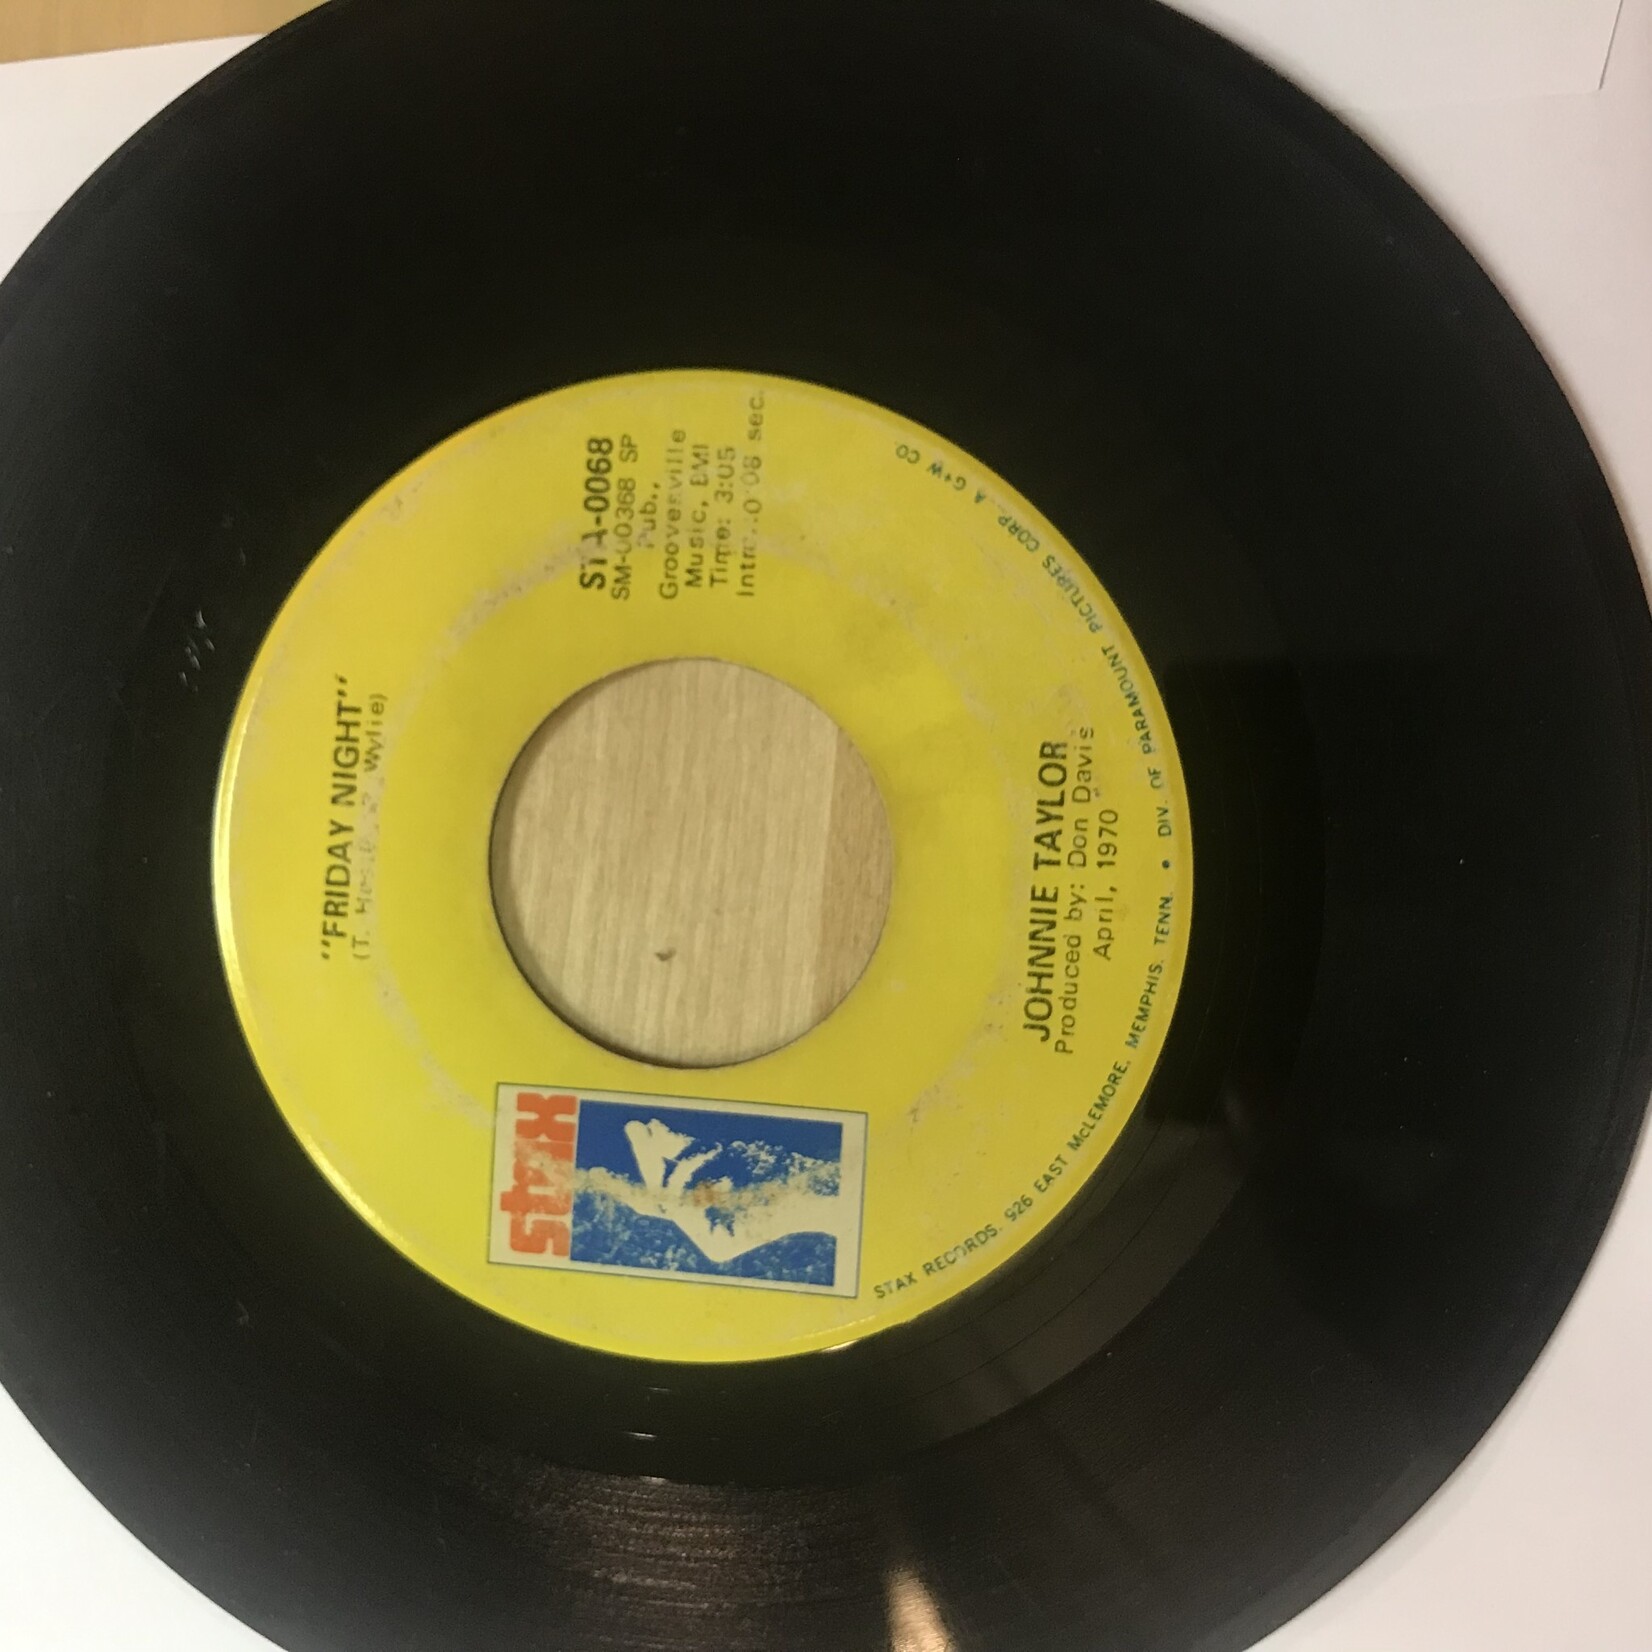 Johnny Taylor - Steal Away / Friday Night - STA 0068 - Vinyl 45 (USED)